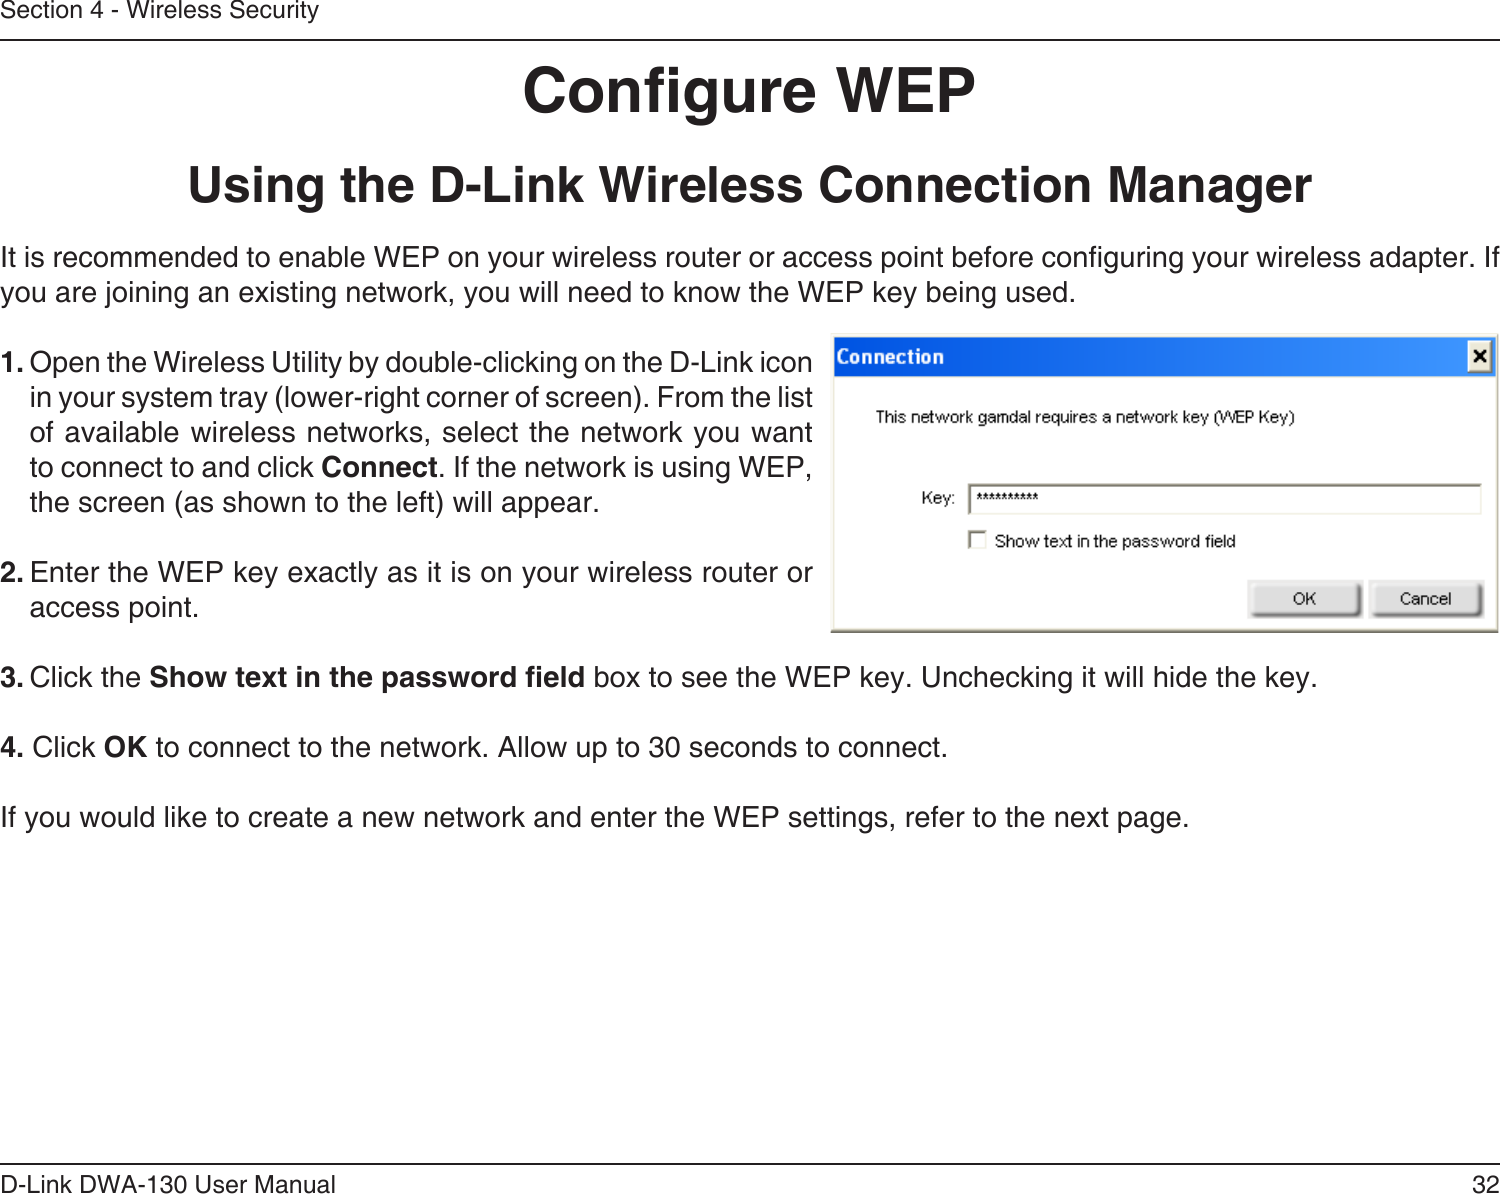 32D-Link DWA-130 User ManualSection 4 - Wireless SecurityCongure WEPUsing the D-Link Wireless Connection ManagerIt is recommended to enable WEP on your wireless router or access point before conguring your wireless adapter. If you are joining an existing network, you will need to know the WEP key being used.1. Open the Wireless Utility by double-clicking on the D-Link icon in your system tray (lower-right corner of screen). From the list of available wireless networks, select the network you want to connect to and click Connect. If the network is using WEP, the screen (as shown to the left) will appear. 2. Enter the WEP key exactly as it is on your wireless router or access point.3. Click the Show text in the password eld box to see the WEP key. Unchecking it will hide the key.4. Click OK to connect to the network. Allow up to 30 seconds to connect.If you would like to create a new network and enter the WEP settings, refer to the next page.